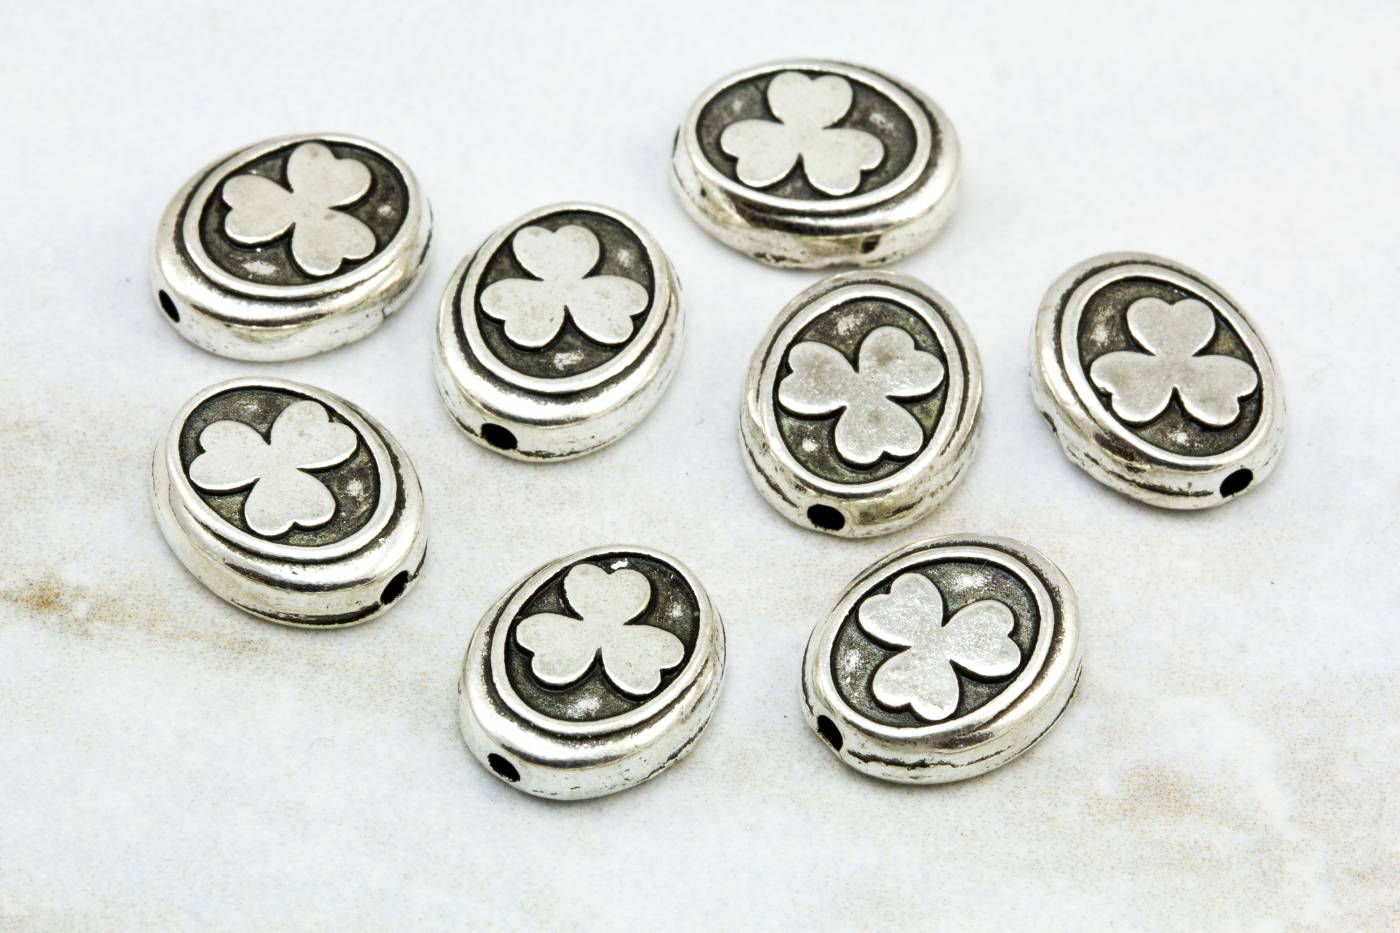 clover-pattern-metal-oval-charm-findings